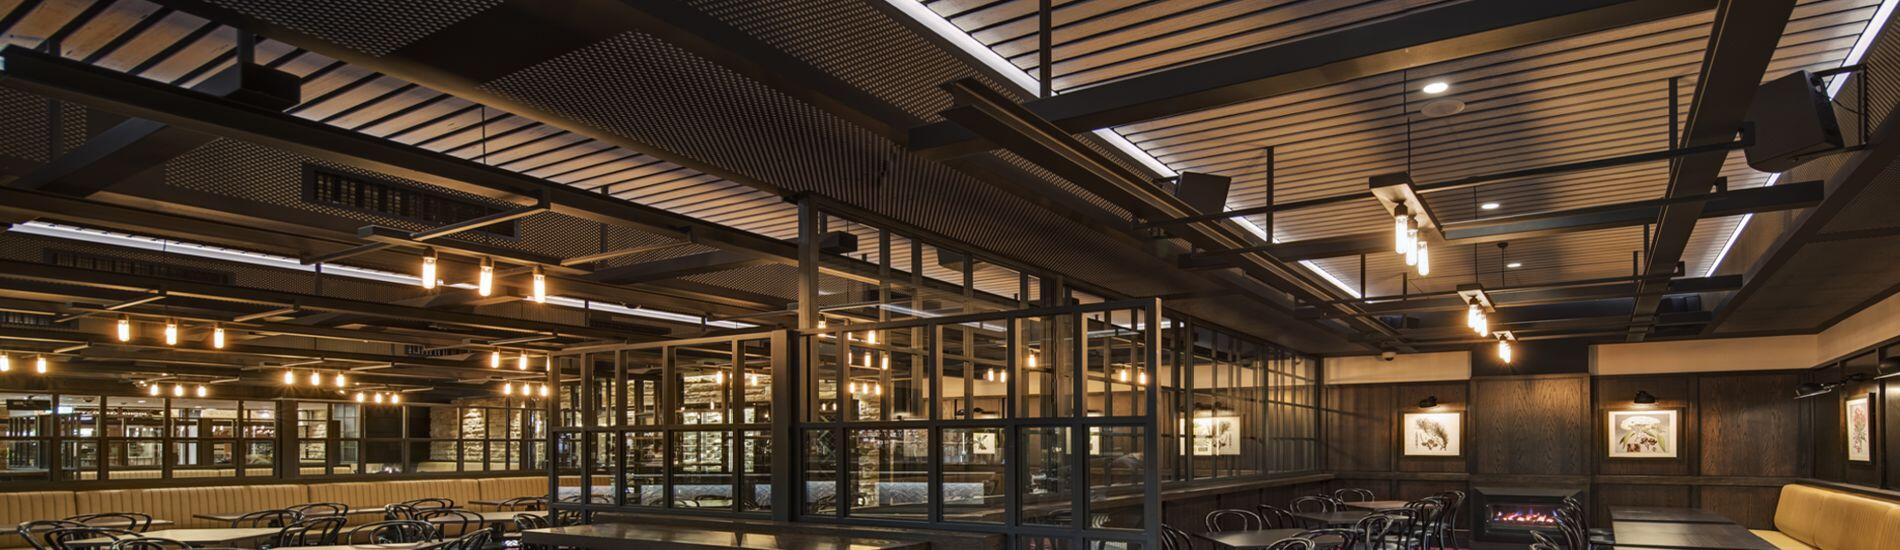 Customised SUPASLAT Slatted Ceilings in DRIFTWOOD Rustic Timber Finishes Creates Mood In Iconic Hotel